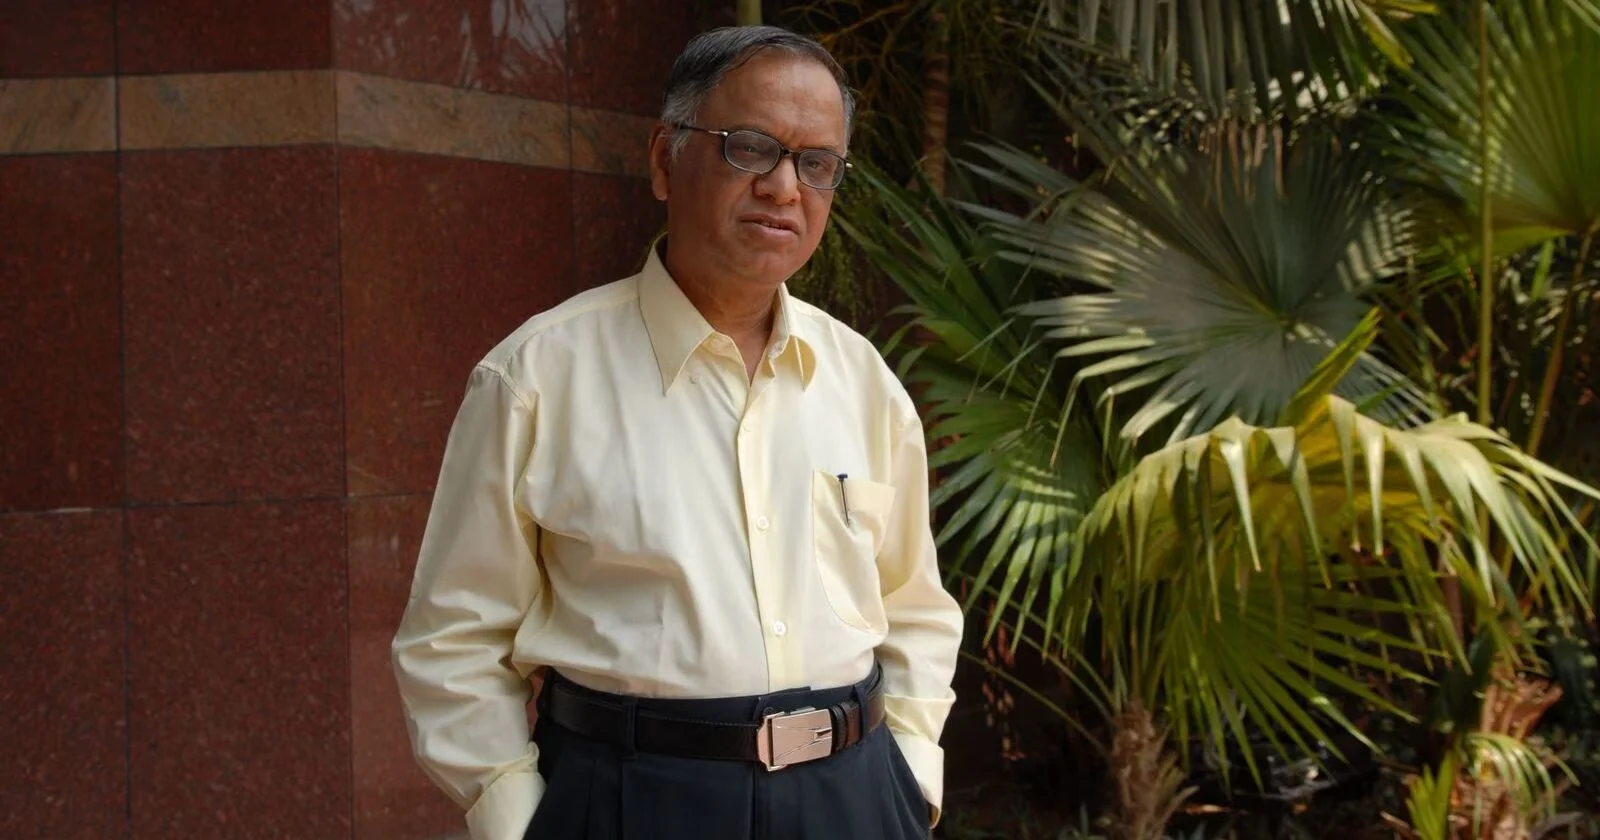 Ashneer Grover Reacts To Narayan Murthy's 70-Hours-A-Week Work Time Suggestion